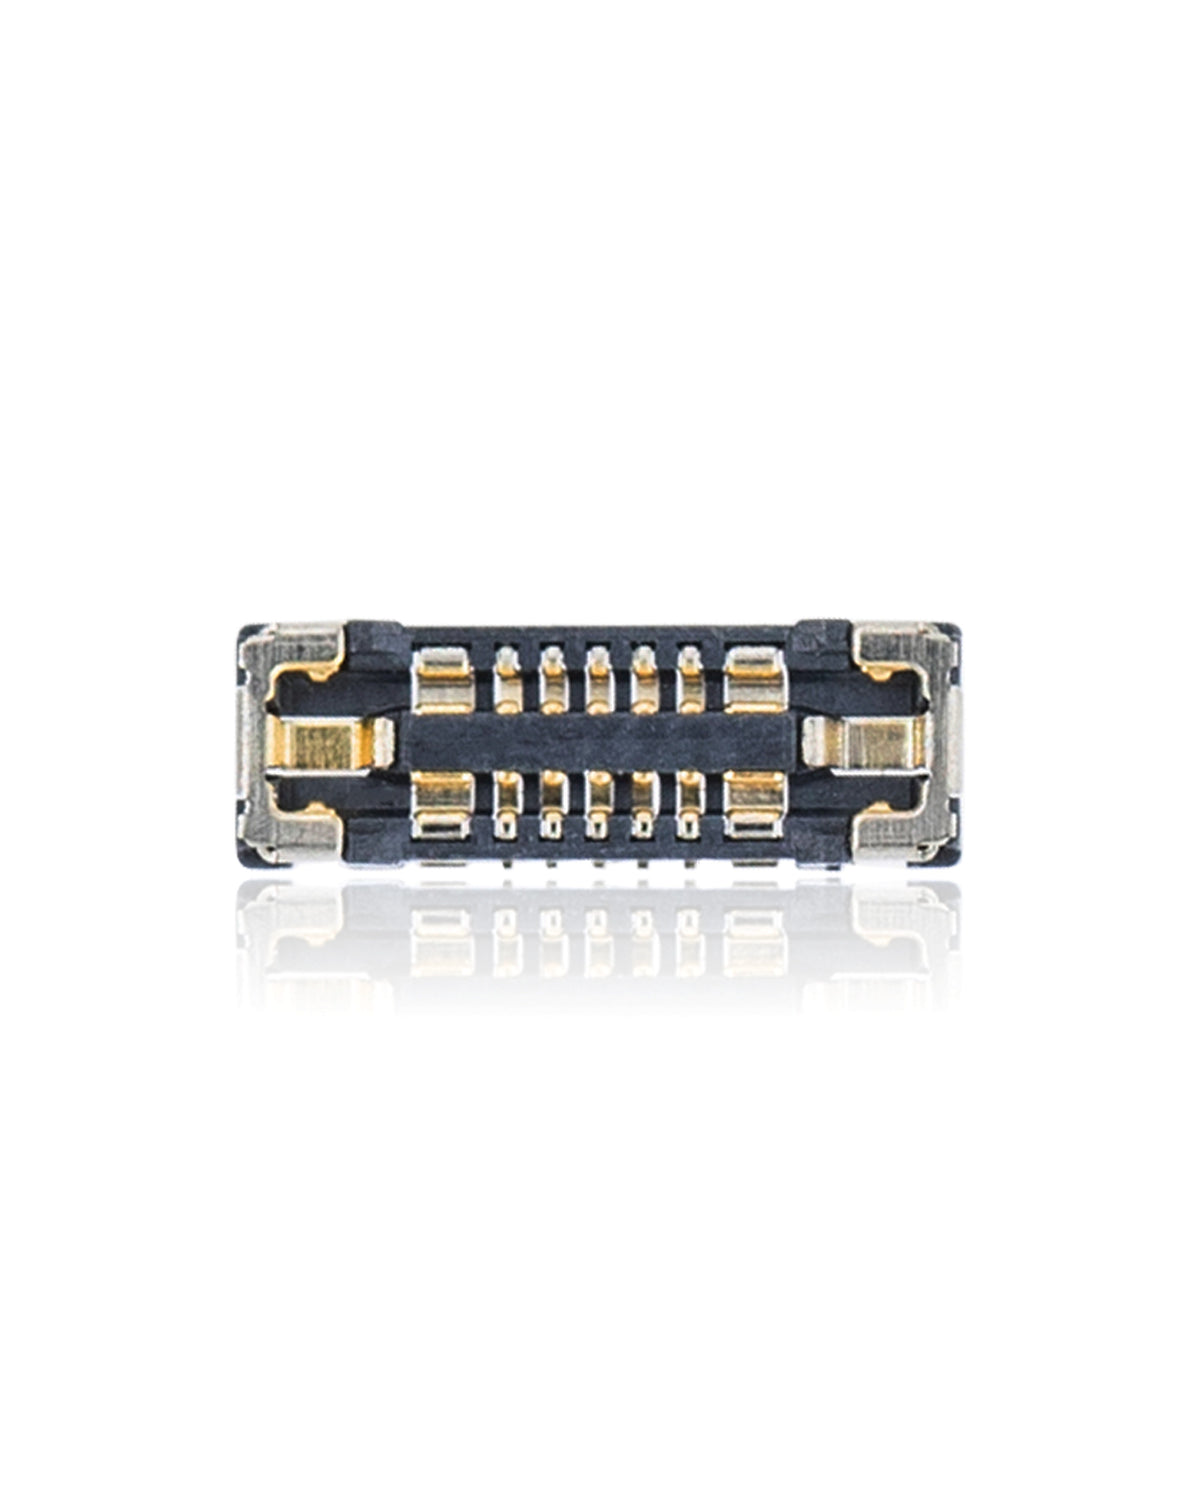 LATTICE PROJECTOR FACE ID FPC CONNECTOR COMPATIBLE WITH IPHONE 11 (10 PINS)